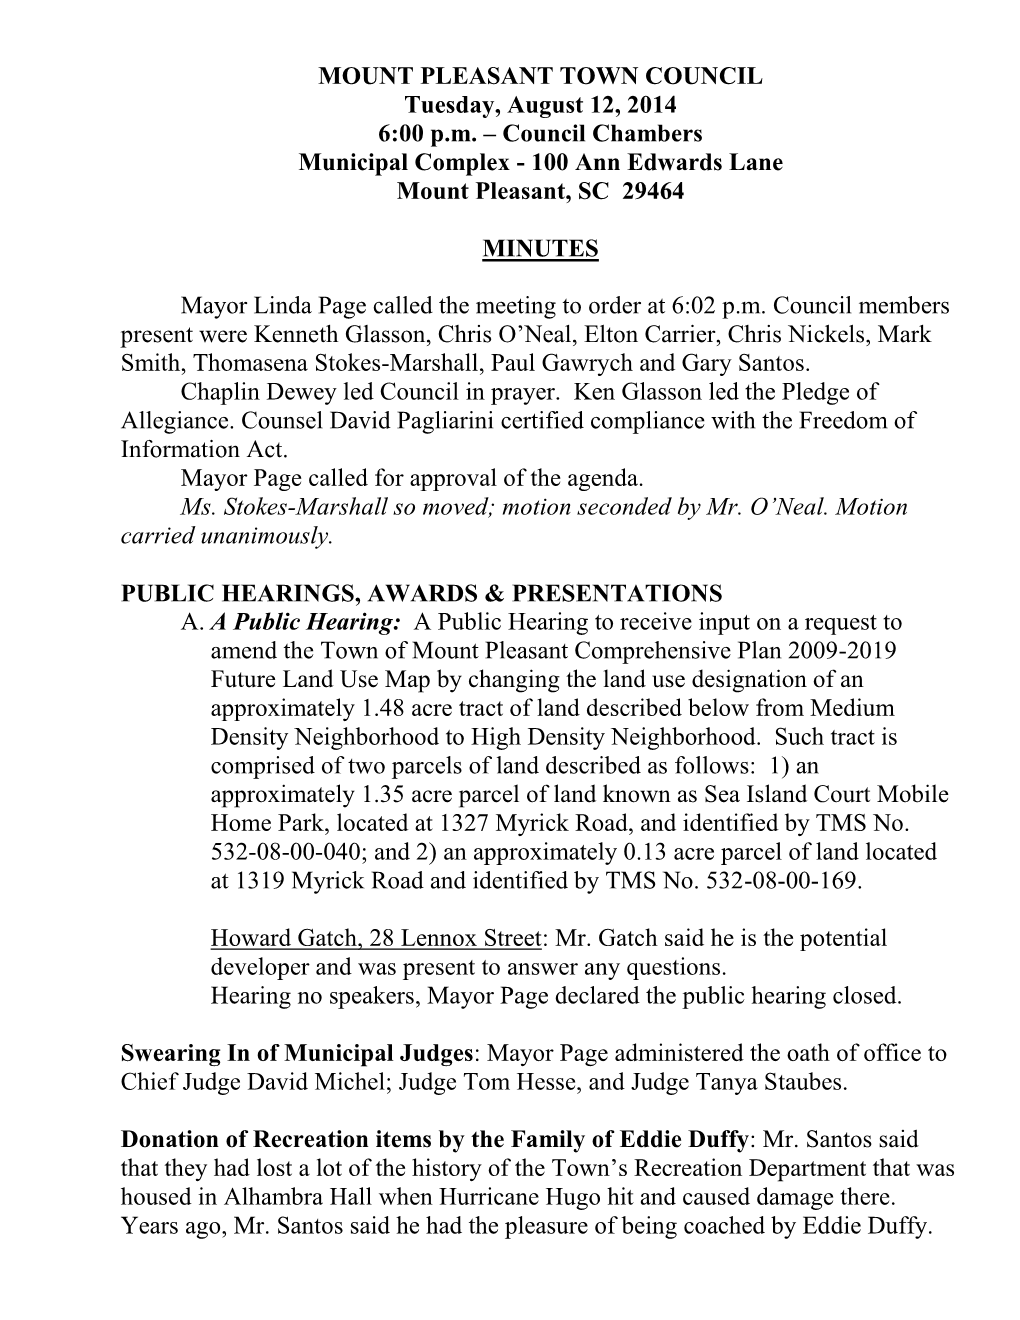 MOUNT PLEASANT TOWN COUNCIL Tuesday, August 12, 2014 6:00 Pm